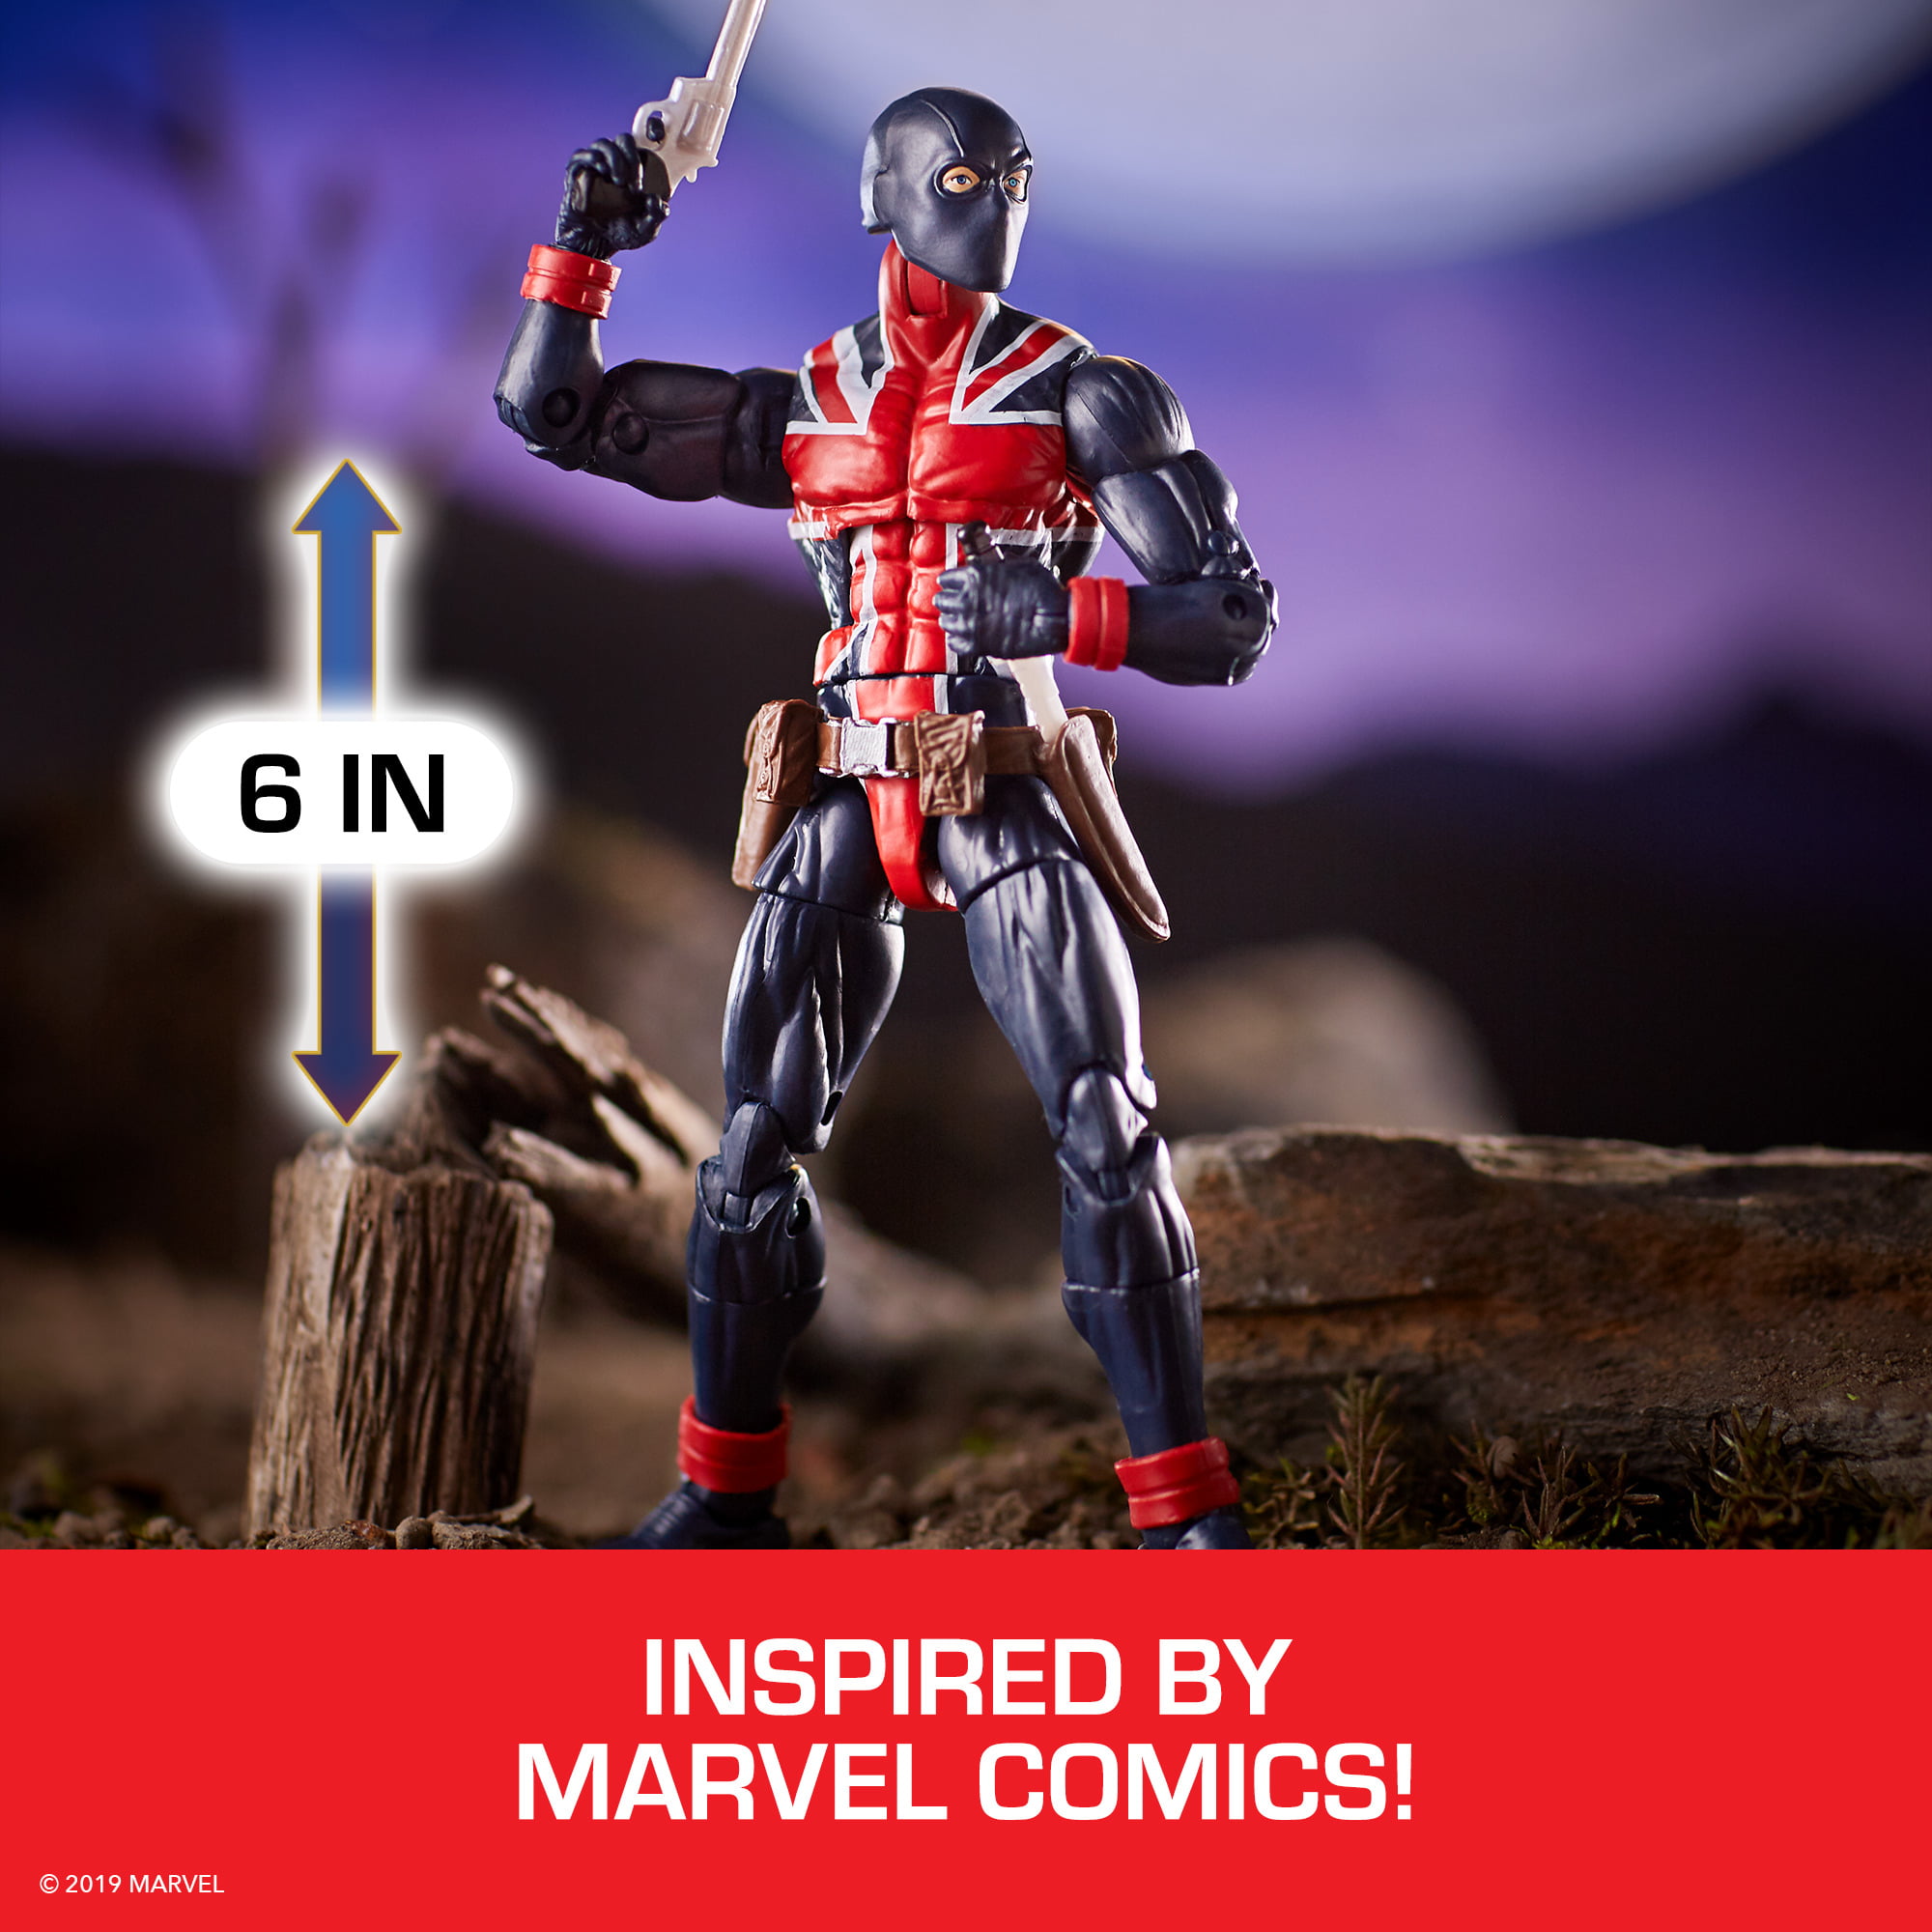 Marvel Legends Series Union Jack 6-Inch Collectible Action Figure Toy for Ages 6 and Up with Accessories and Build-A-Figure Piece 